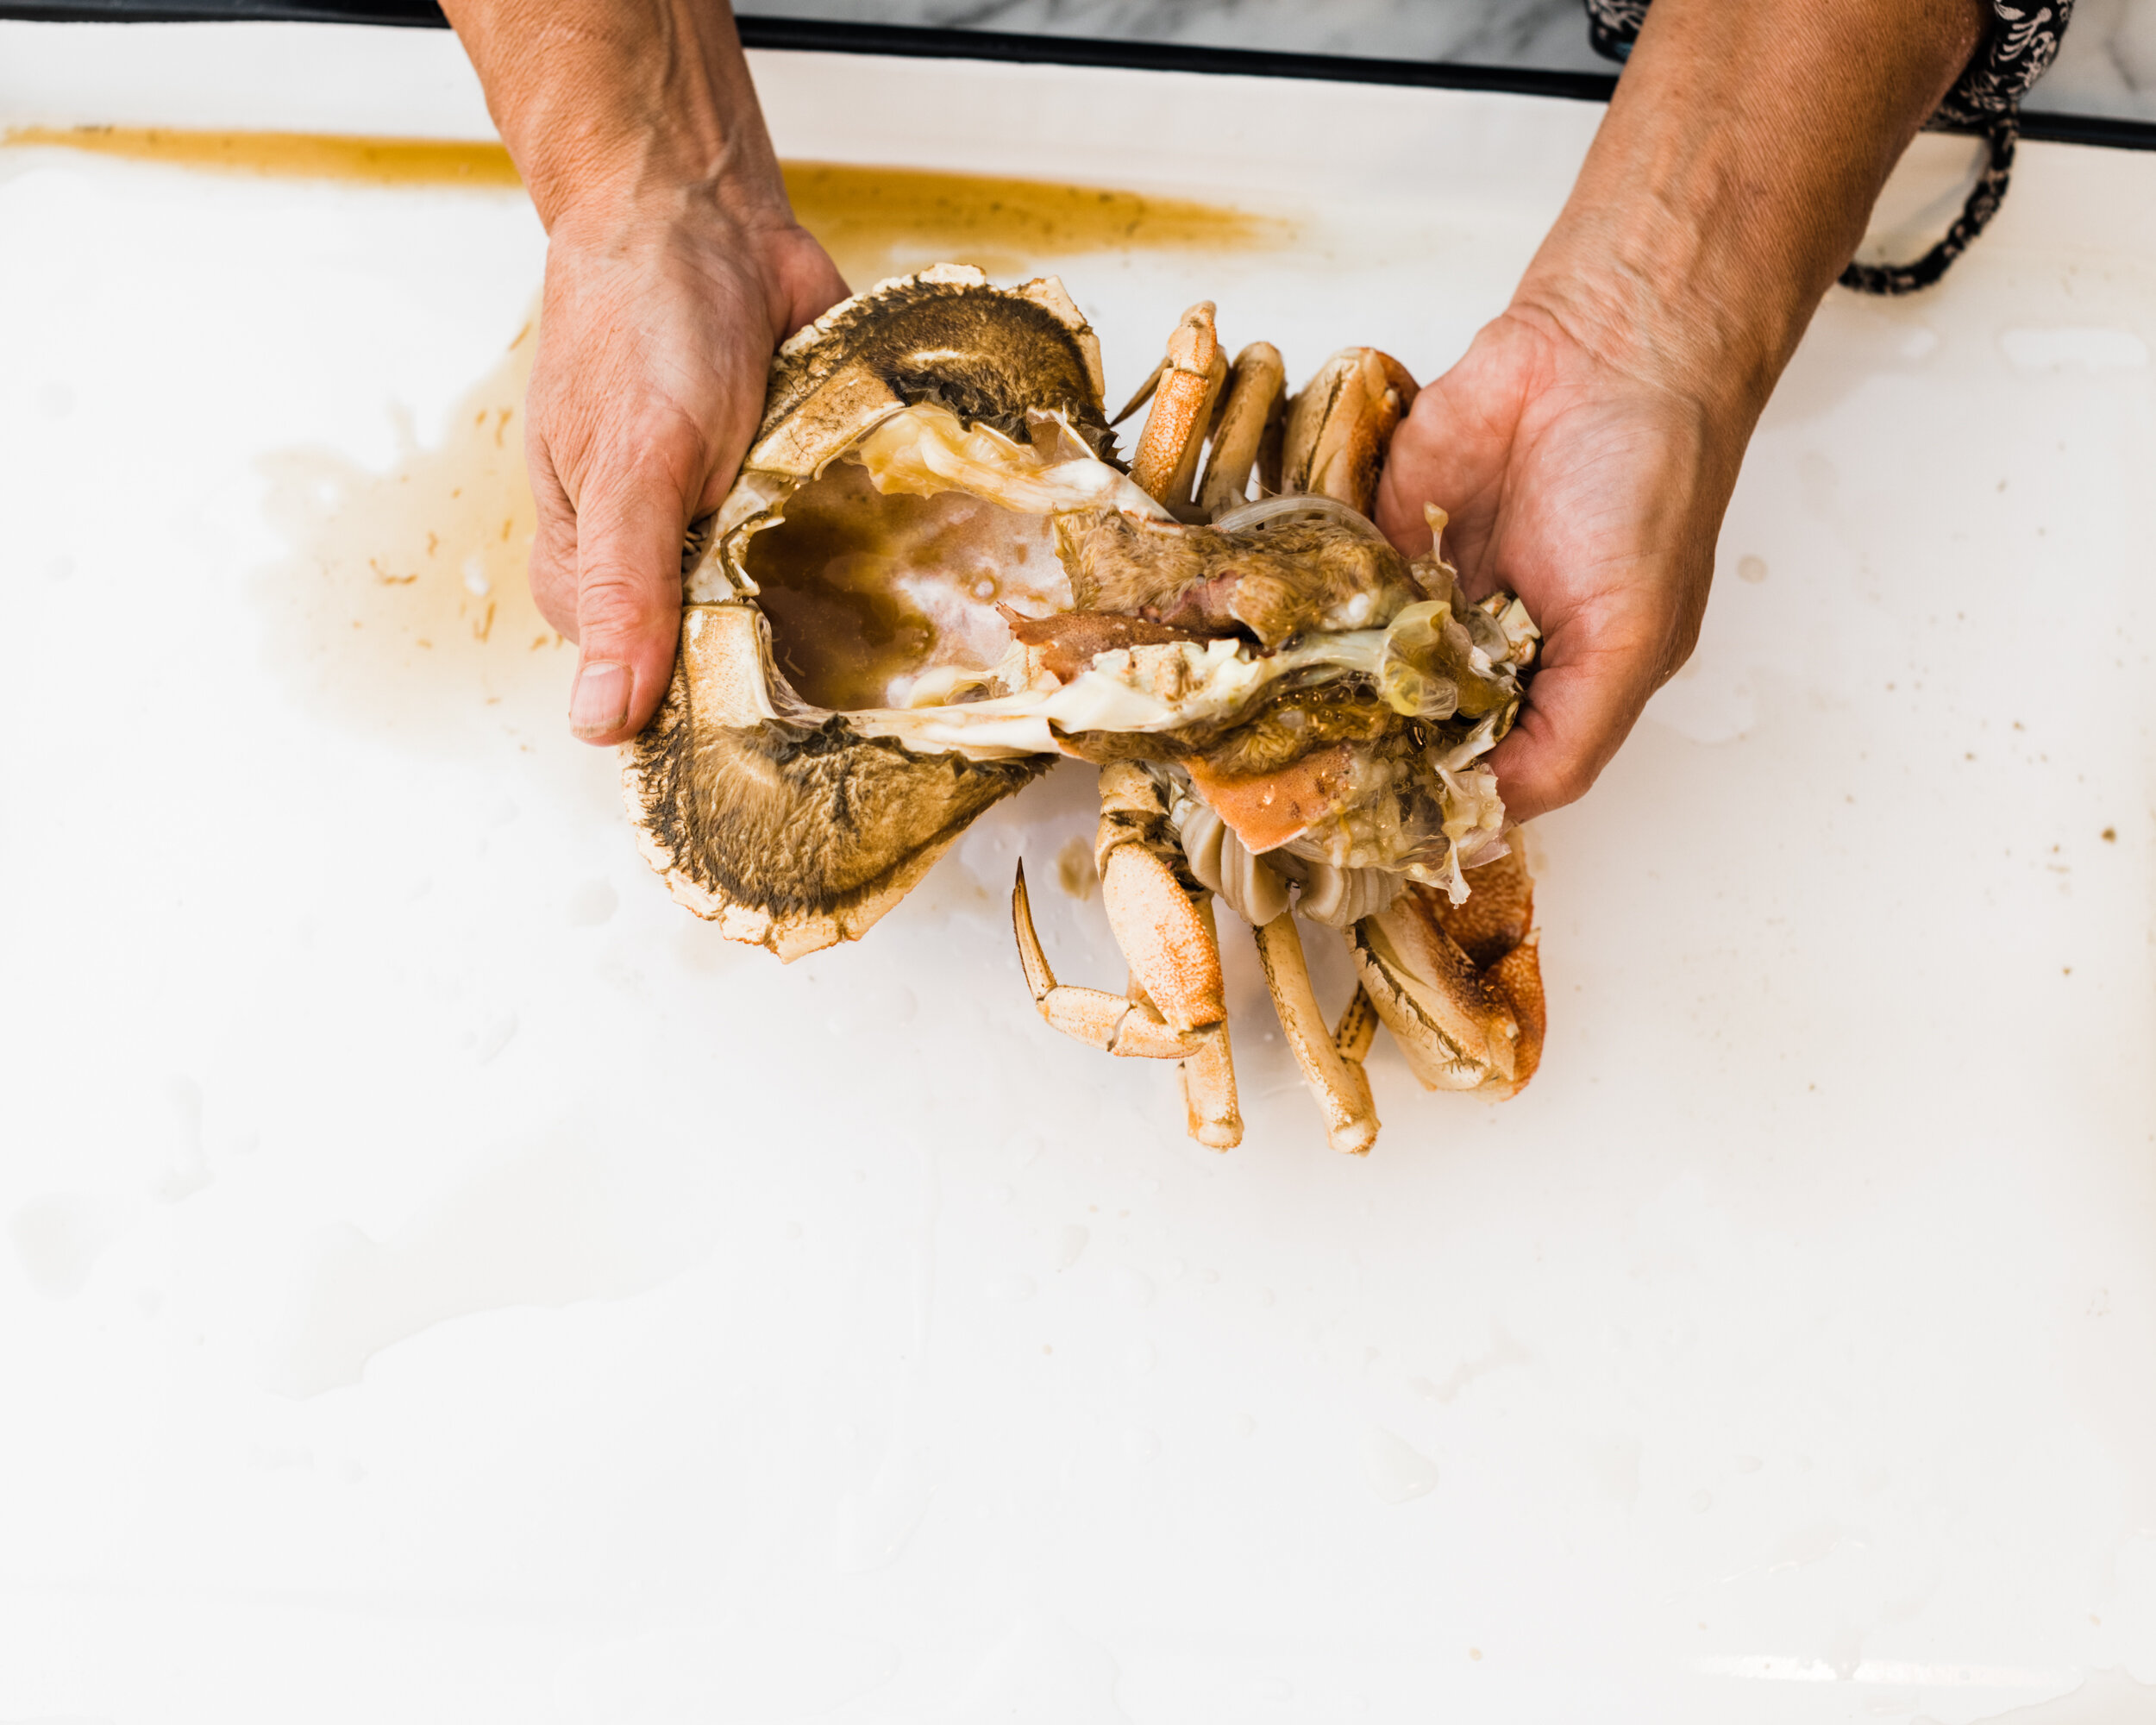 IndianSeafood-Crab-Cleaning-9697_WEB.jpg